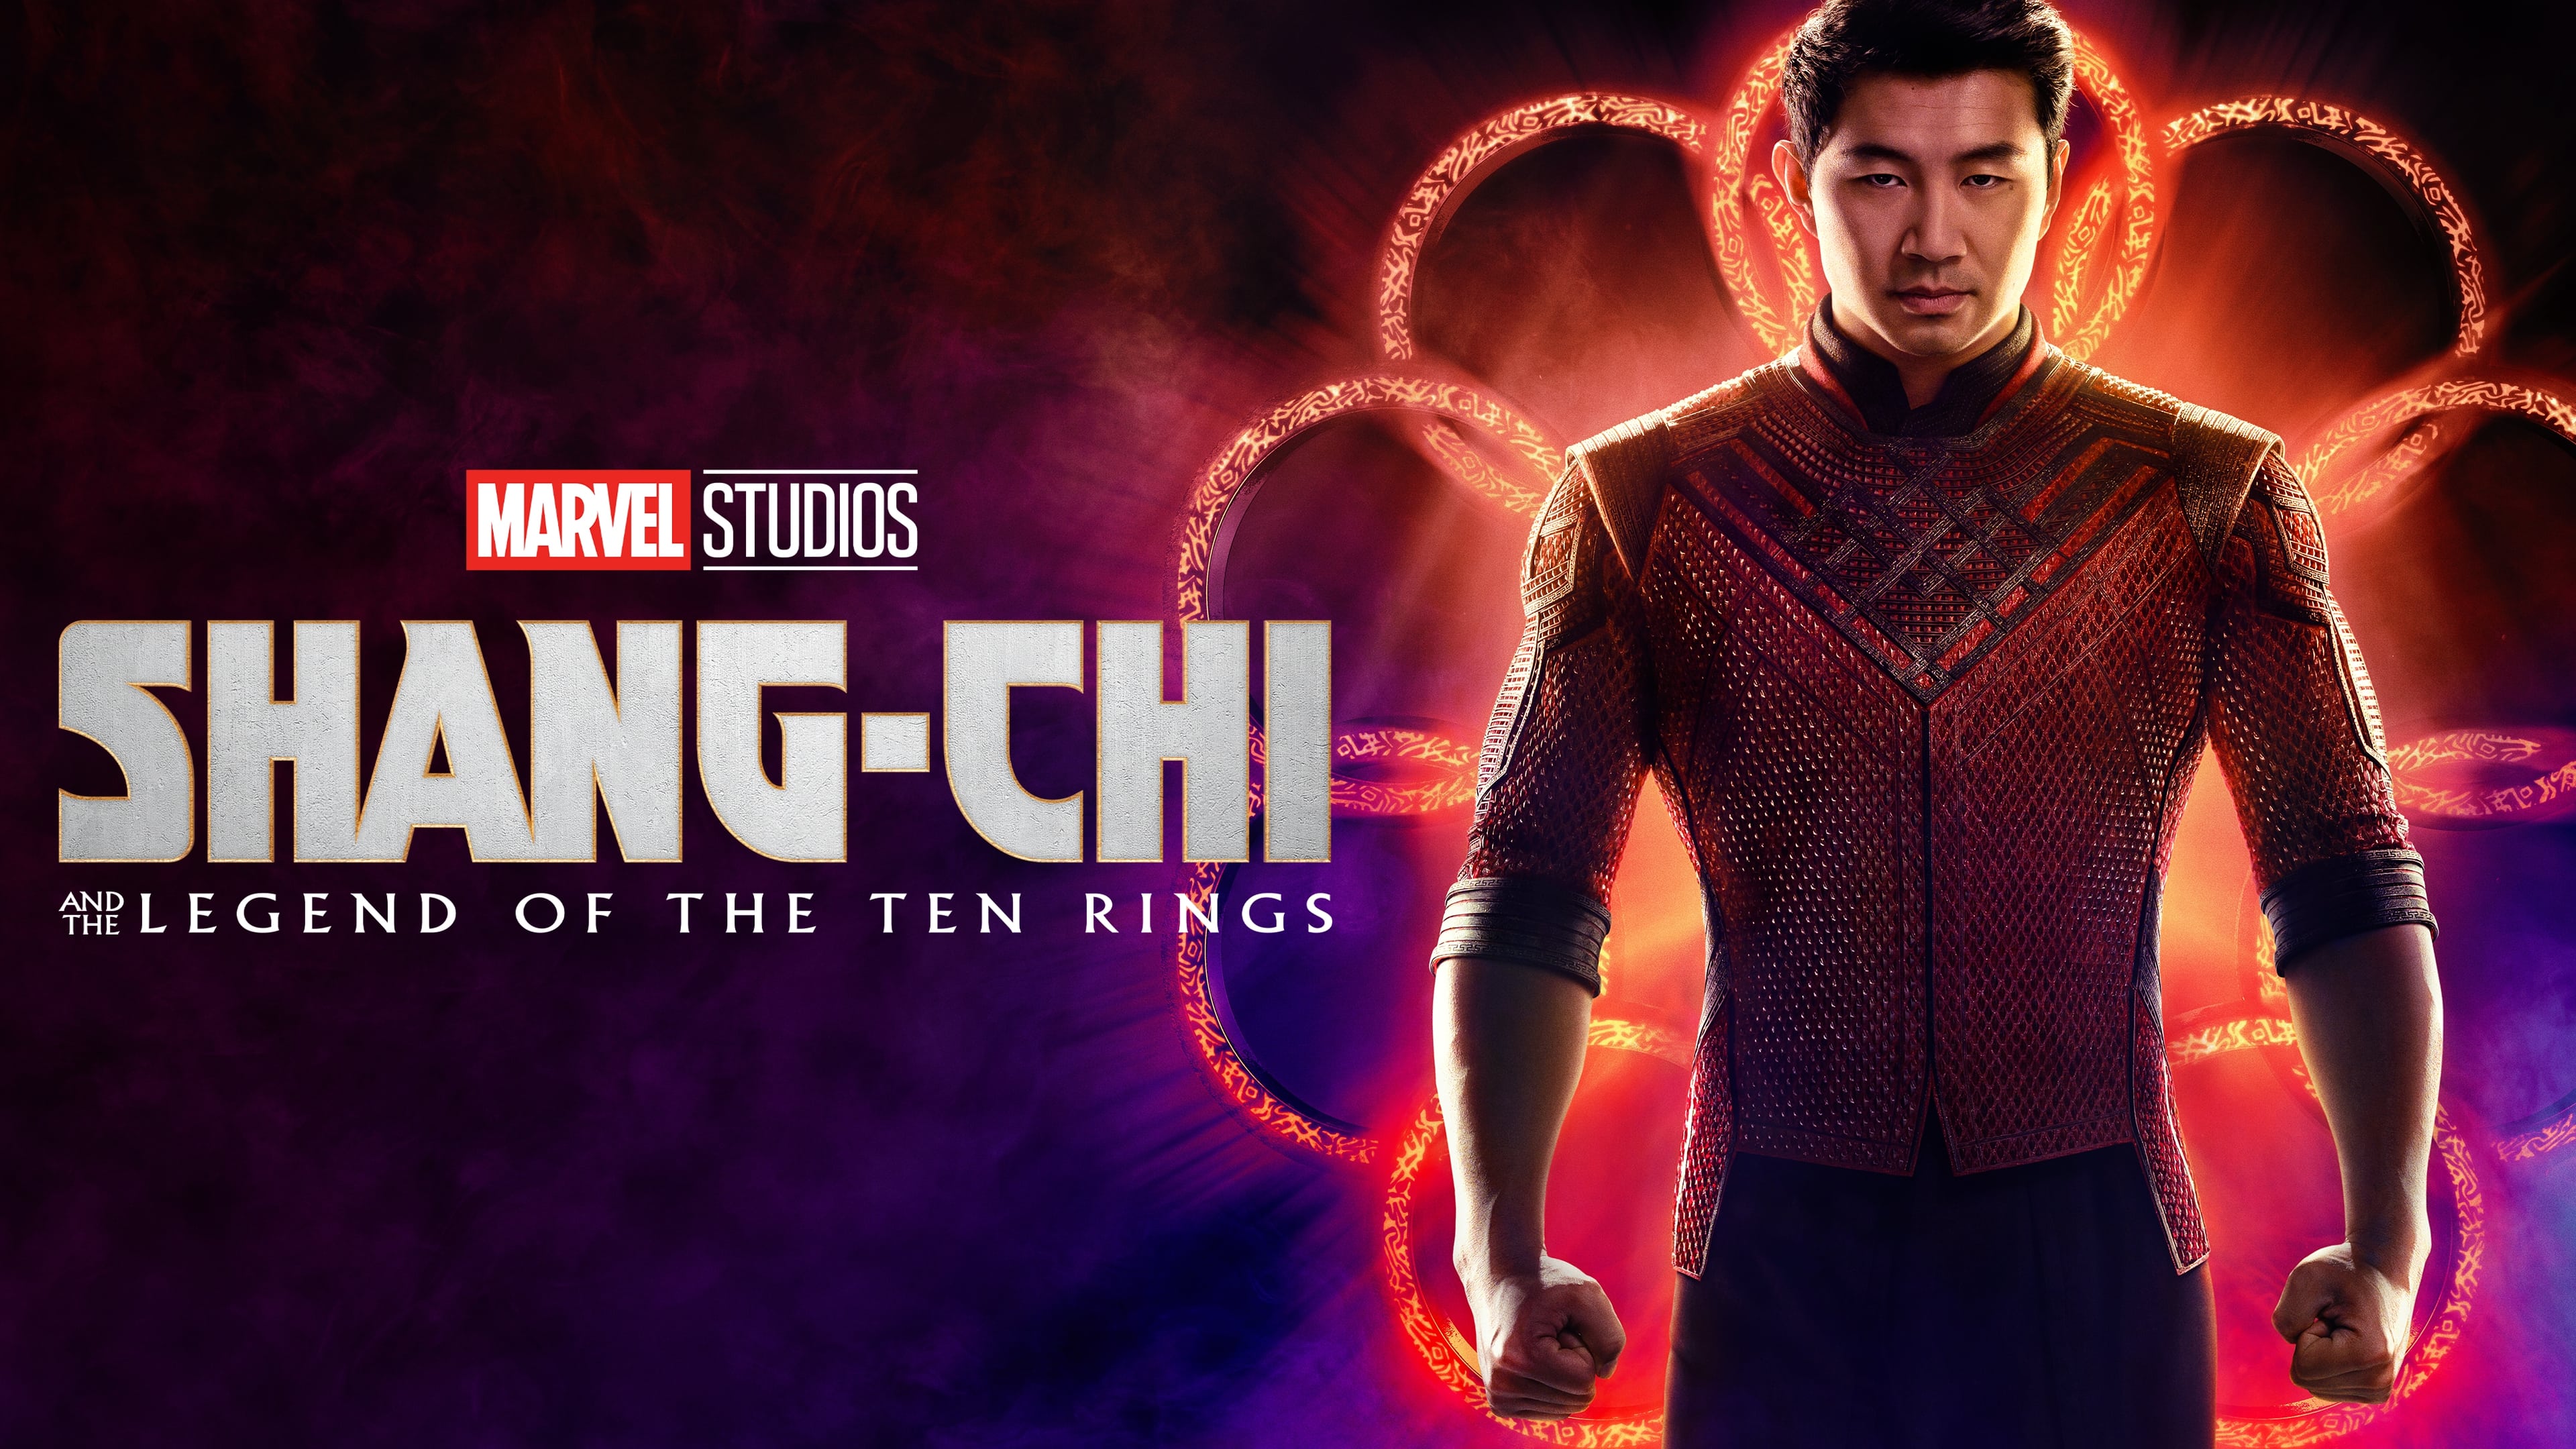 shang chi, movie, shang chi and the legend of the ten rings, simu liu